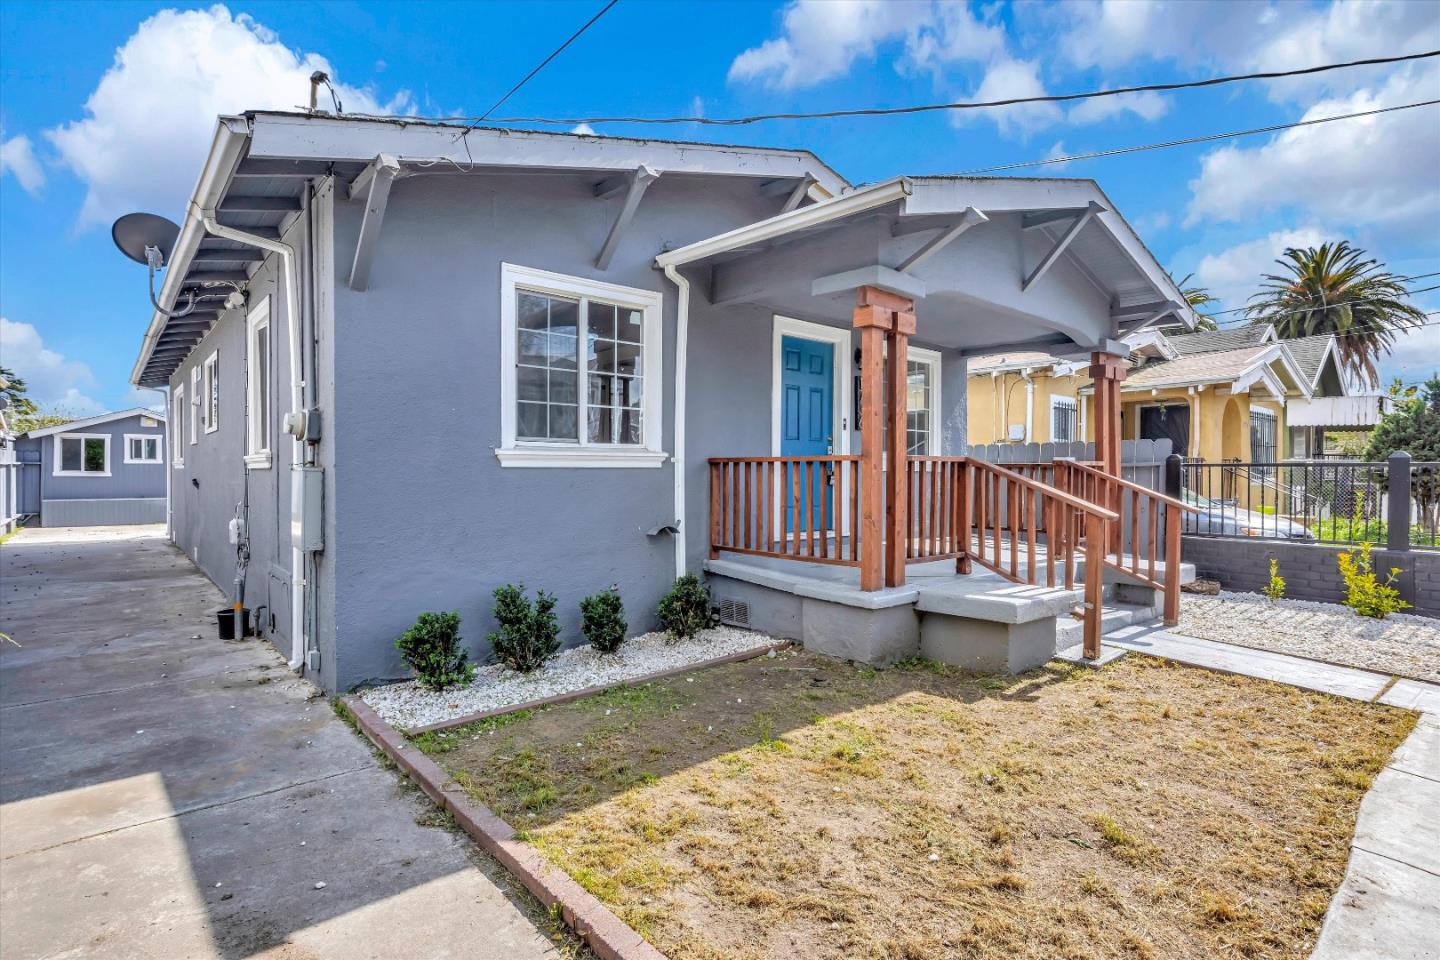 Photo of 1736 96th Ave in Oakland, CA